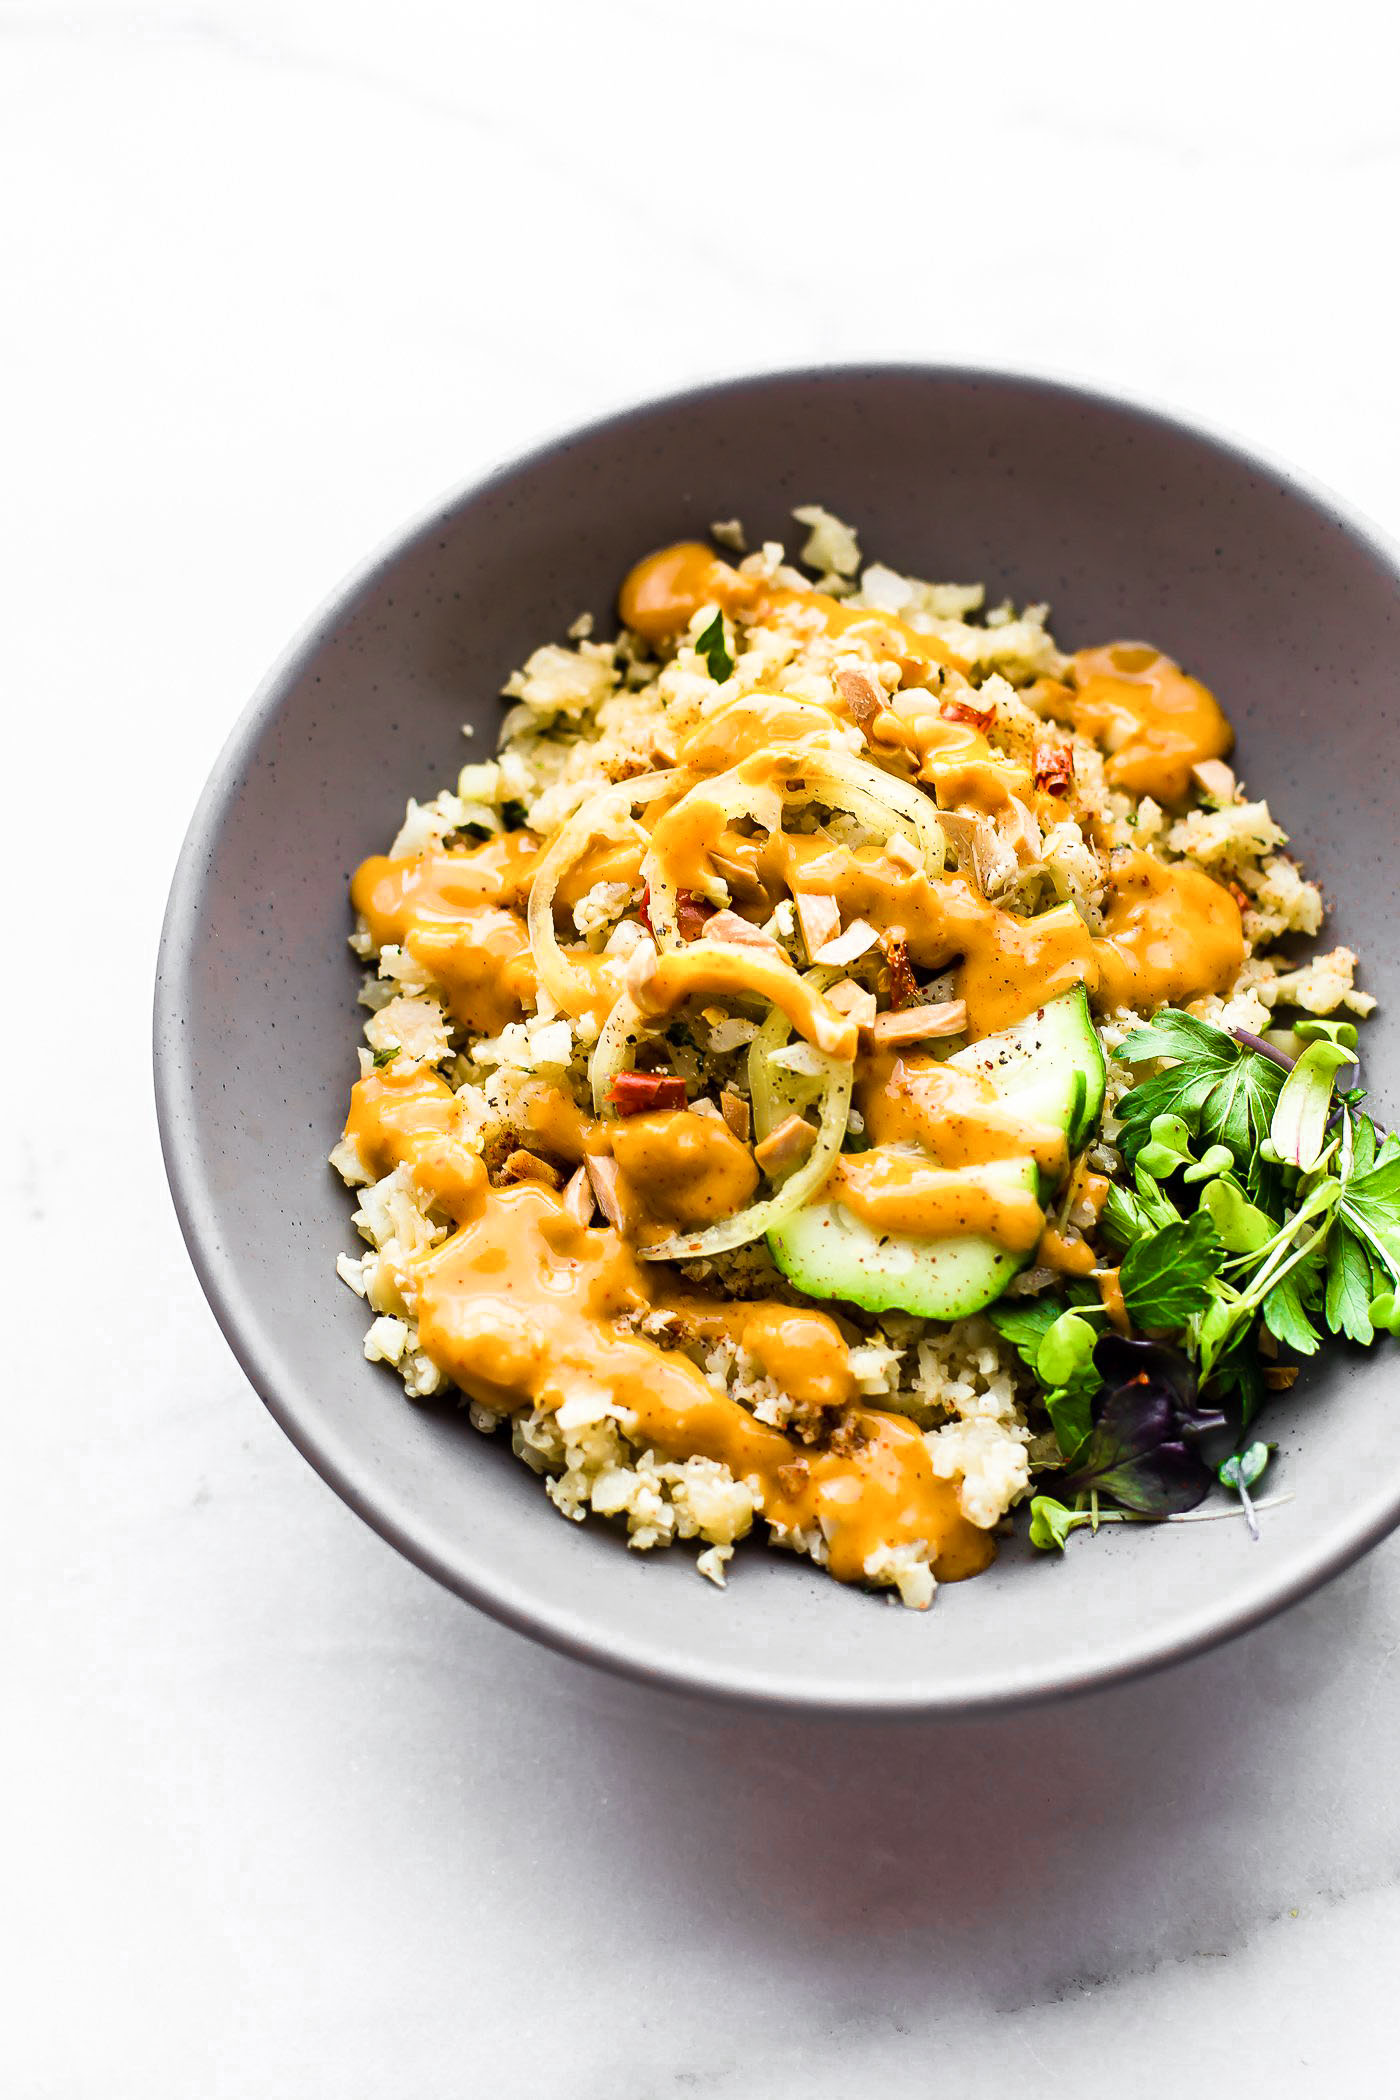 Chili Garlic Cauliflower Risotto Bowls are an easy Paleo dish to satisfy that comfort food craving! A healthy vegan recipe with a spicy sauce. #paleo #vegan #cauliflower #dinner #healthy #dairyfree #risotto